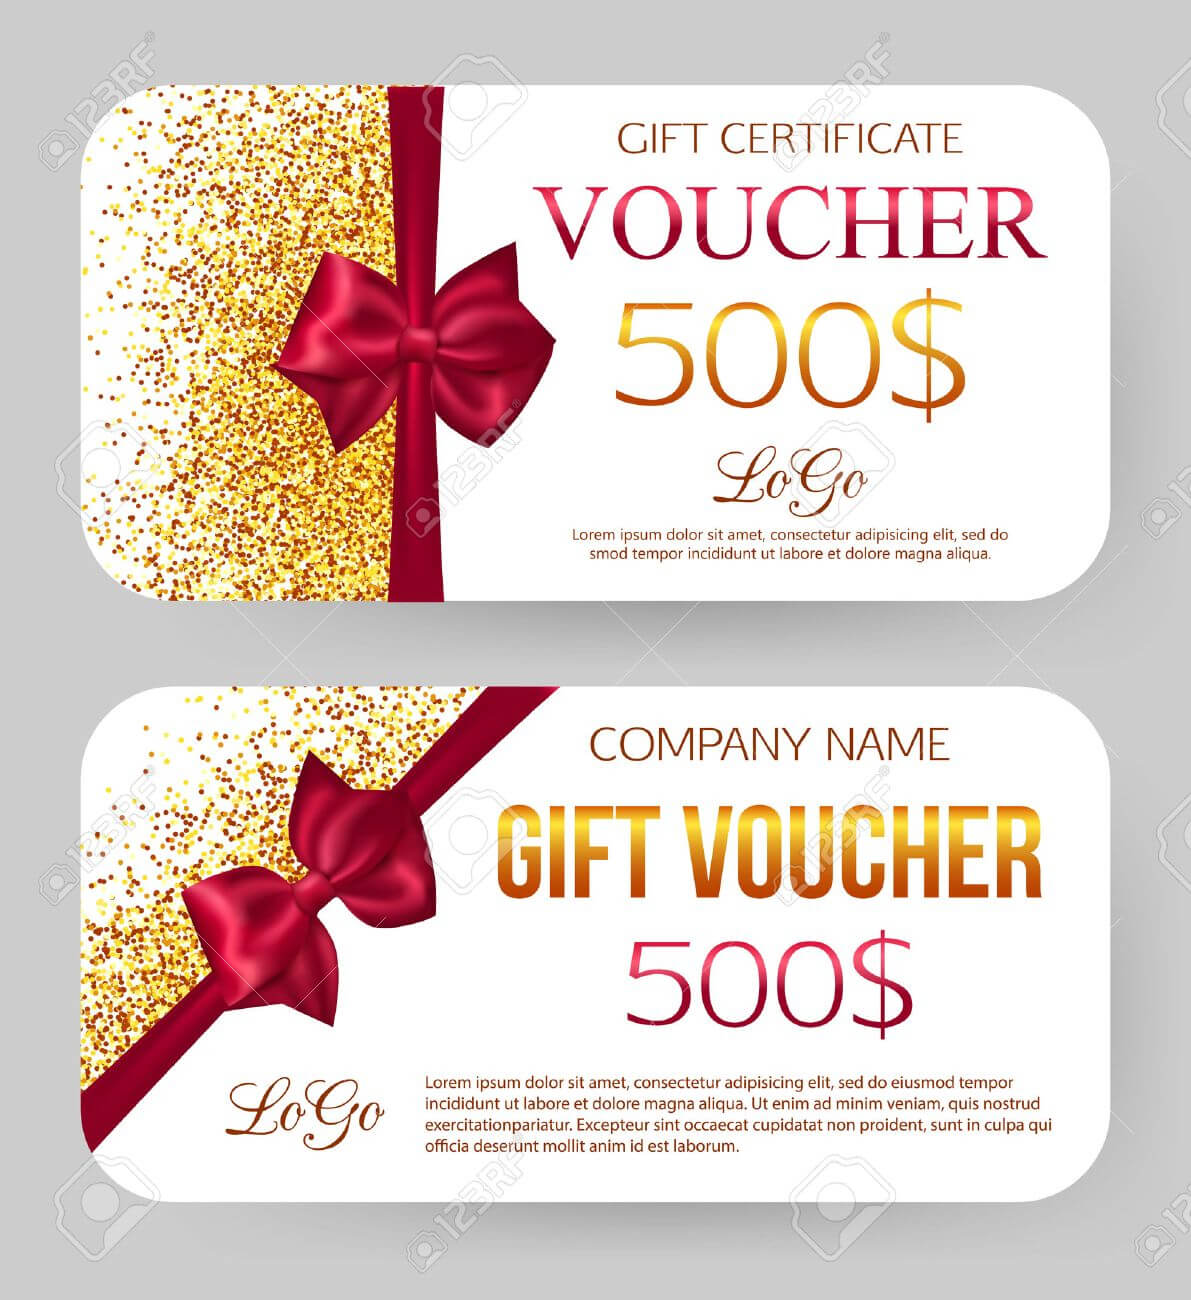 Gift Voucher Template. Golden Design For Gift Certificate Coupon For Magazine Subscription Gift Certificate Template